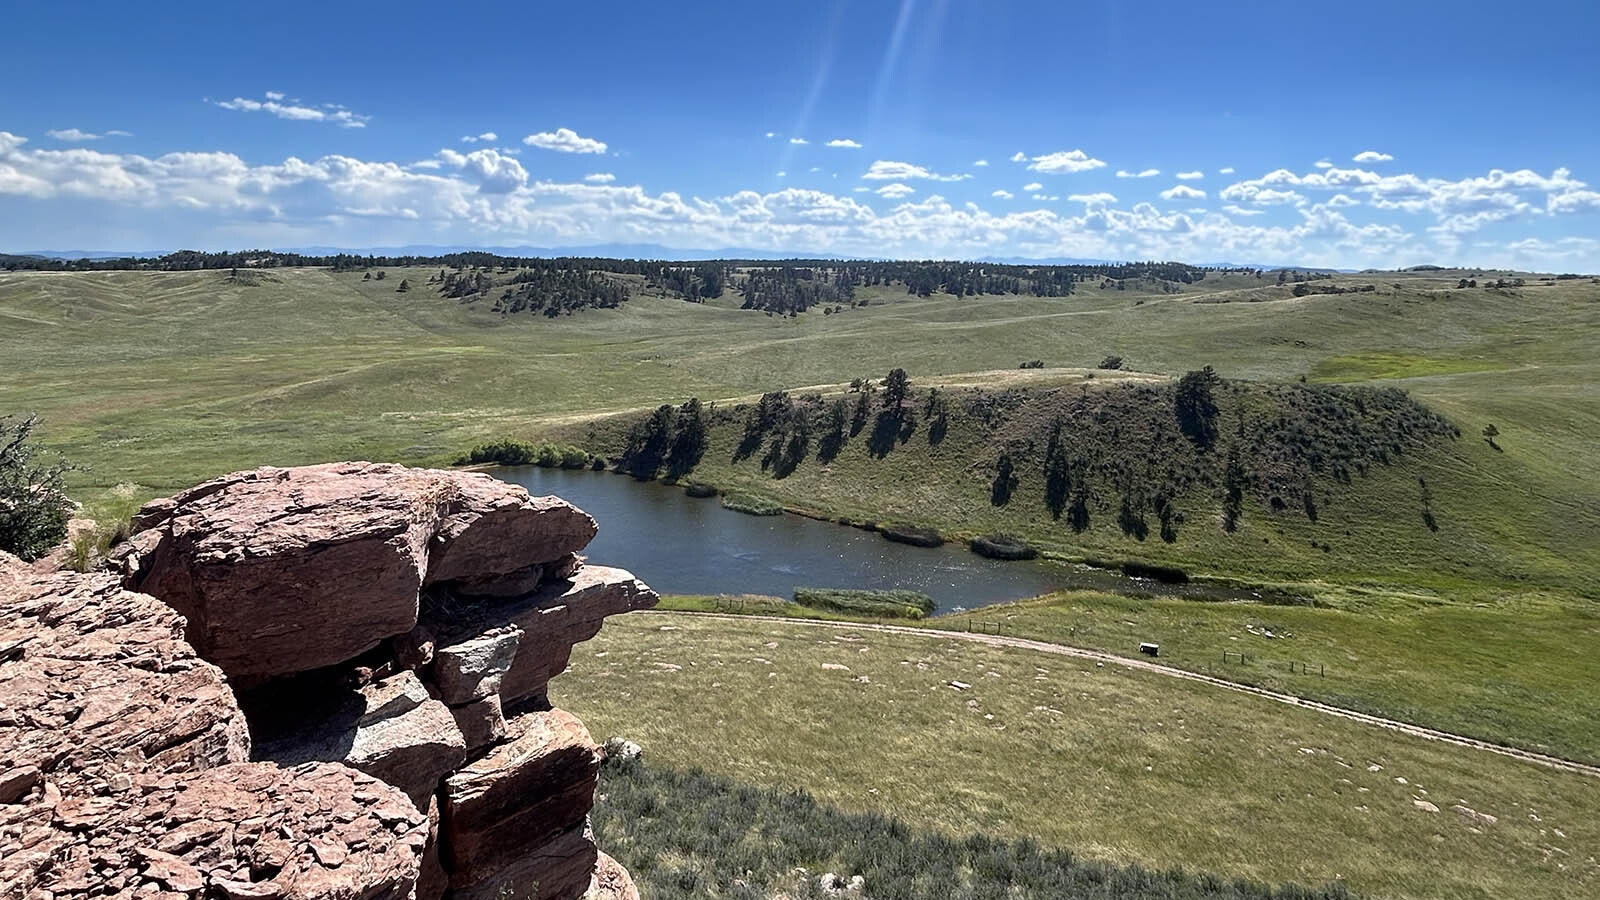 The Belvoir Ranch west of Cheyenne offers some of the most spectacular views in southeast Wyoming.